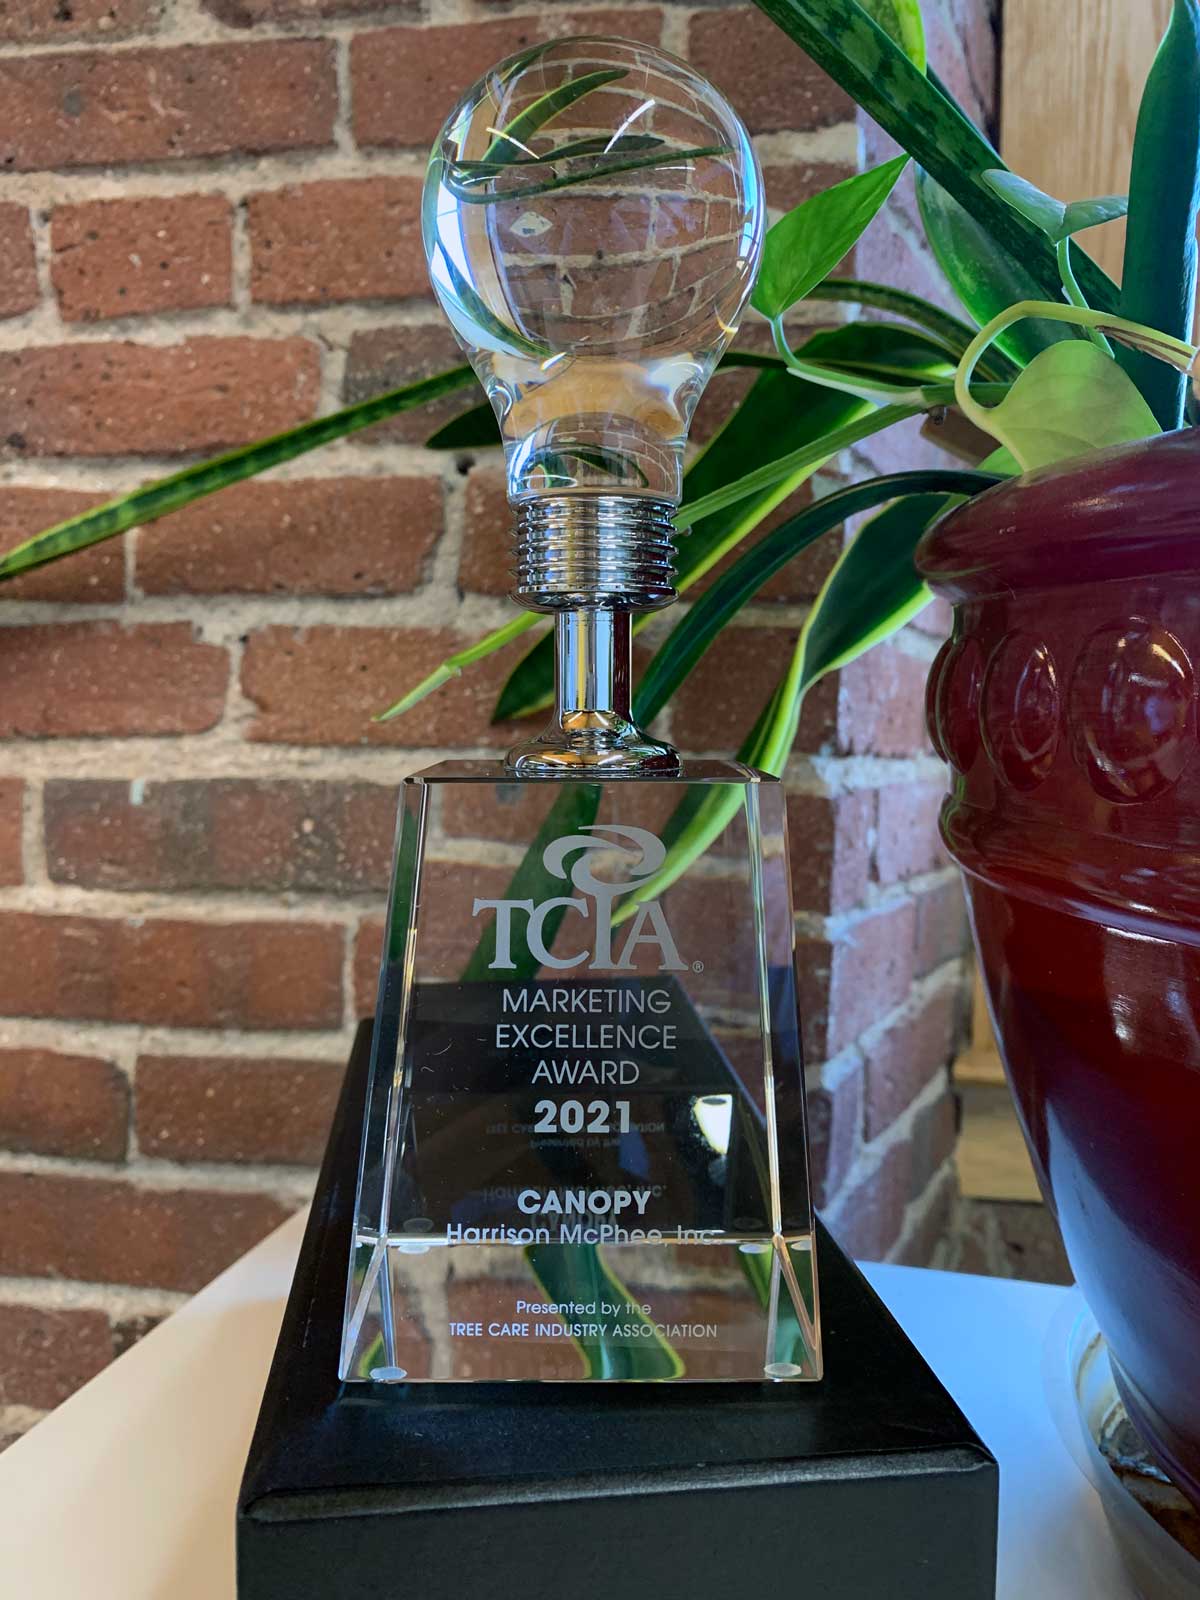 Marketing Excellence Award Trophy